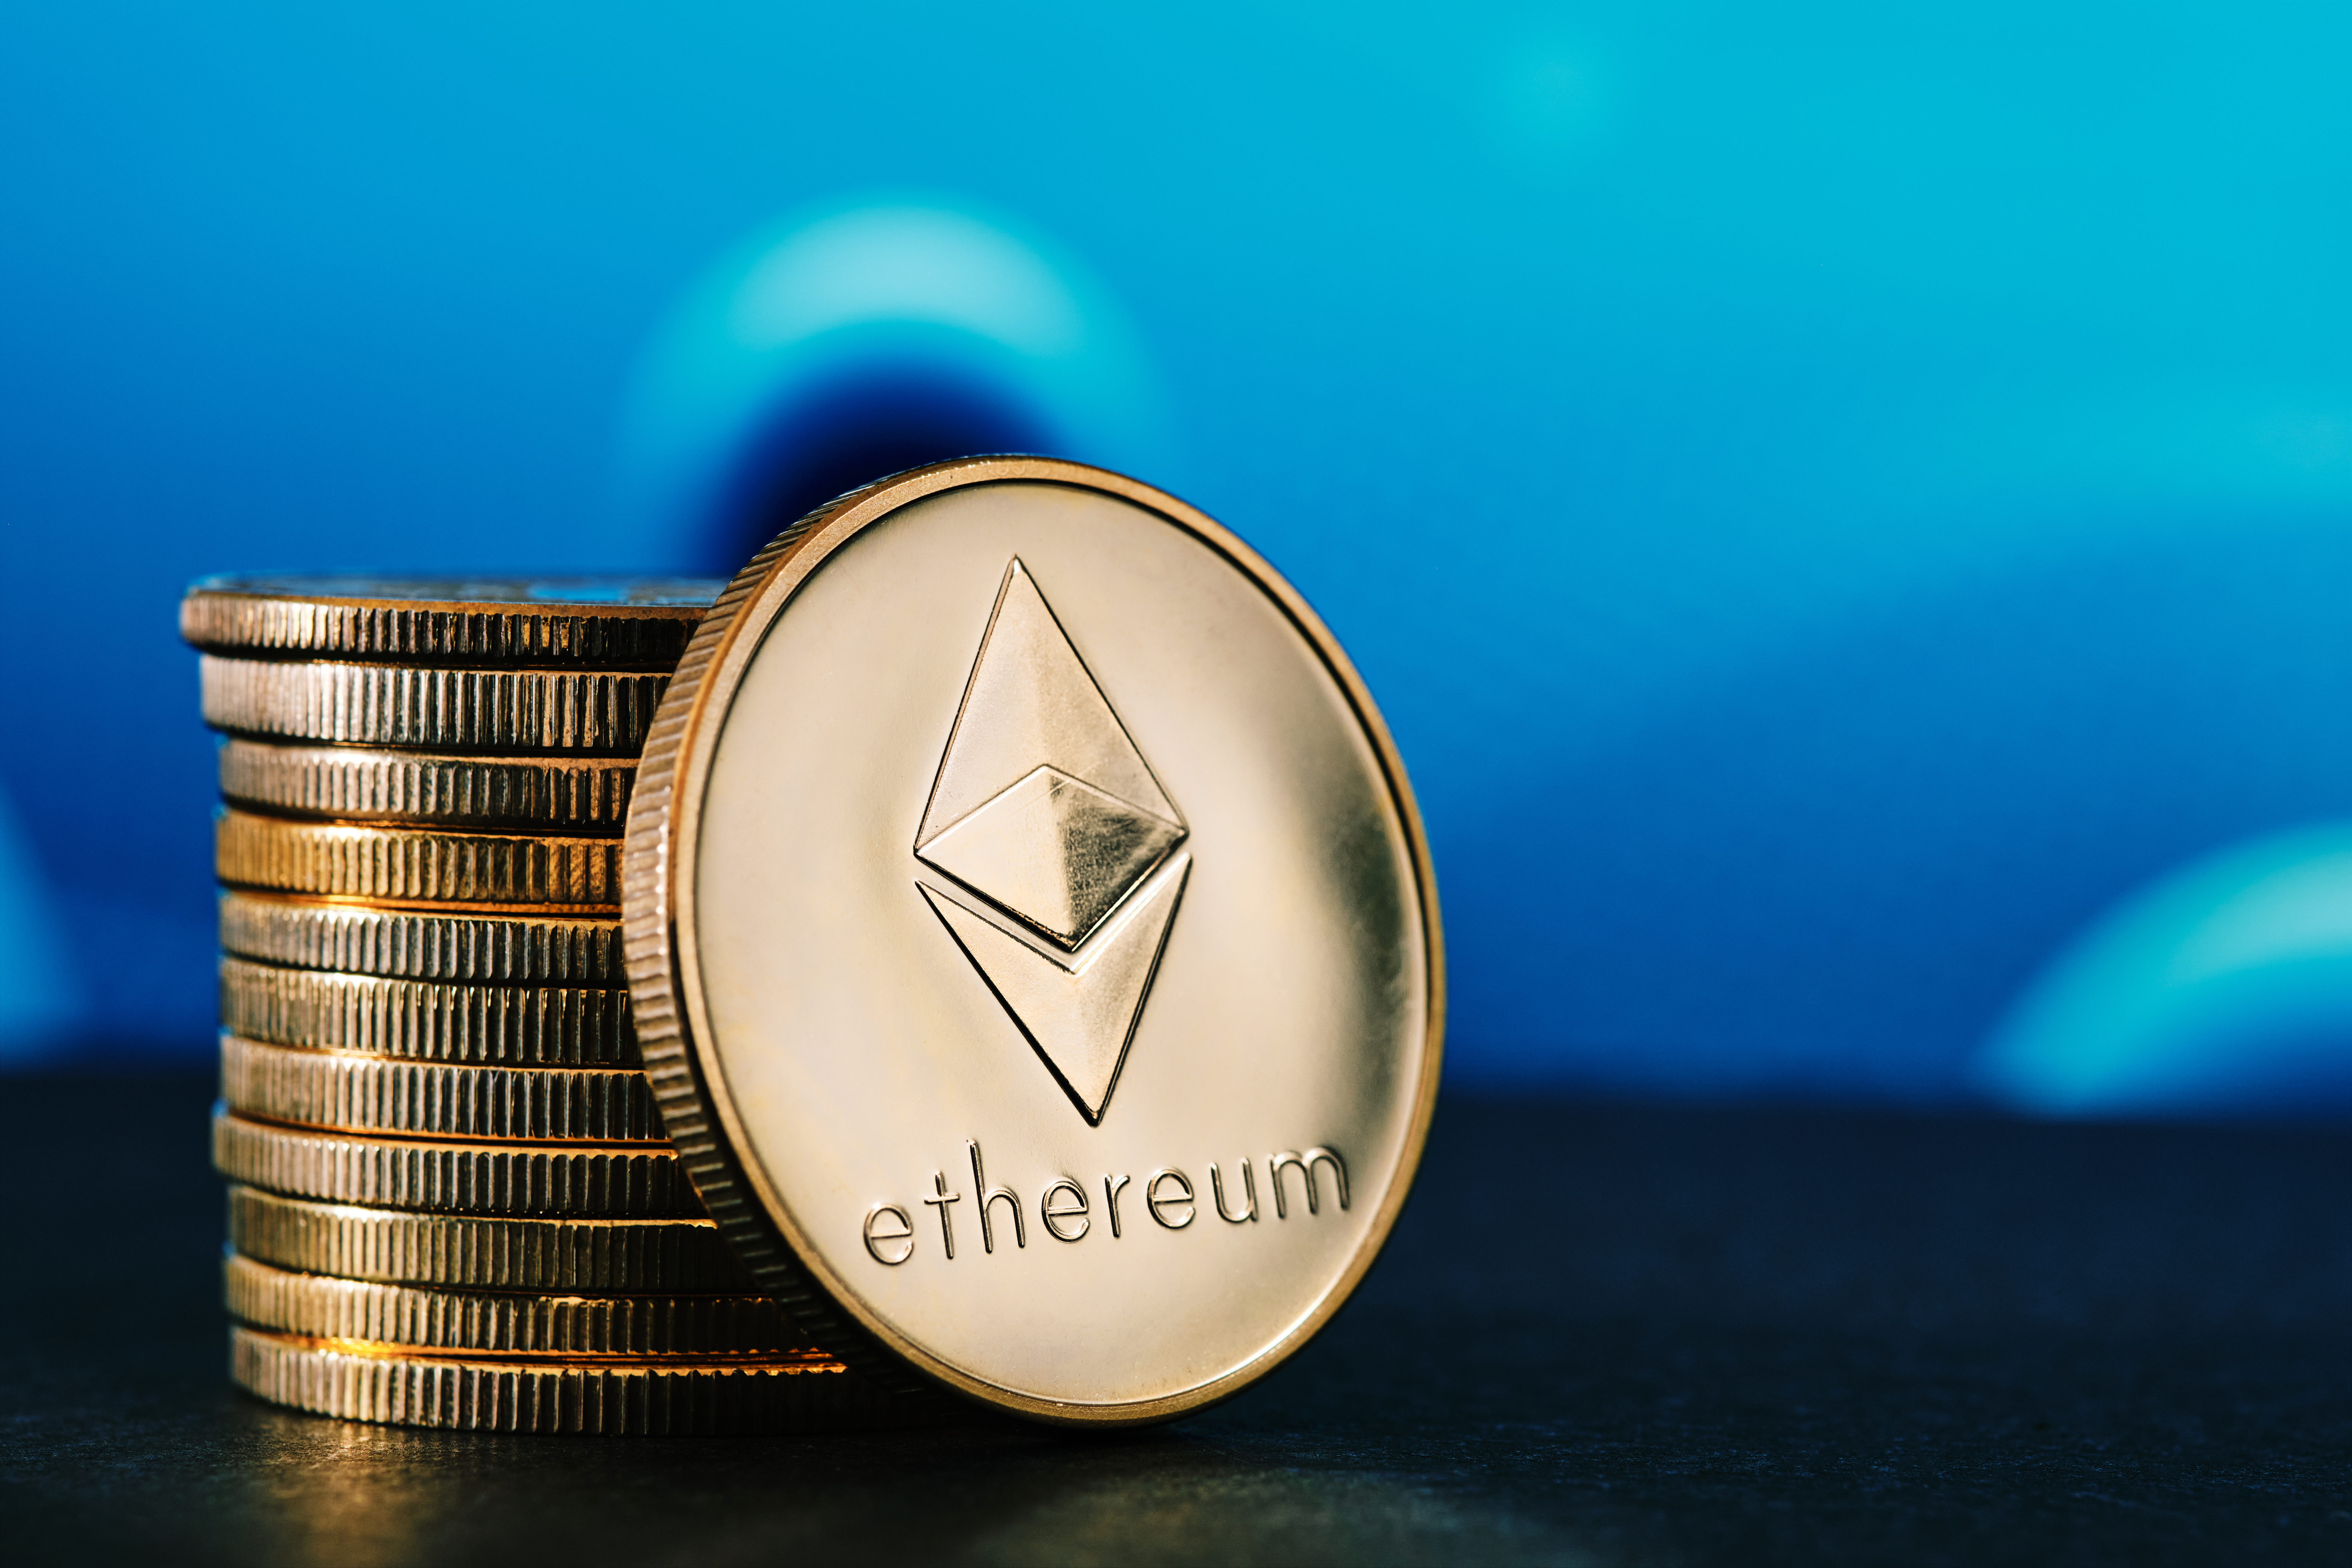 Ethereum (ETH) Price Set to Roar as These Two Key Deflationary Tailwinds Pick Up